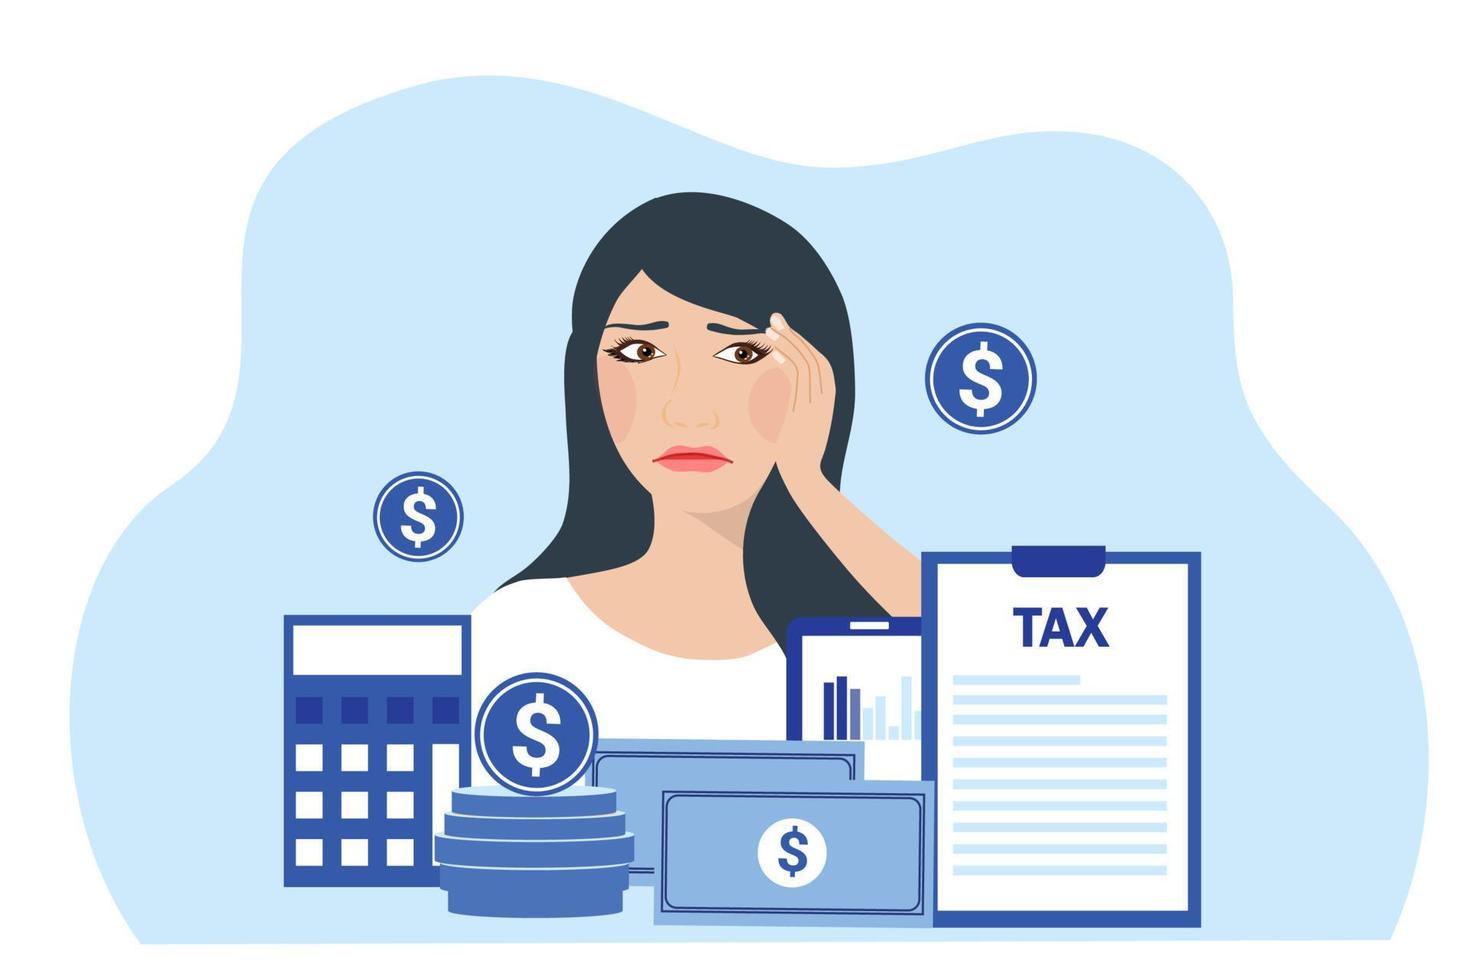 Tax time and tax payment concept. woman has a headache with tax calculation vector illustration